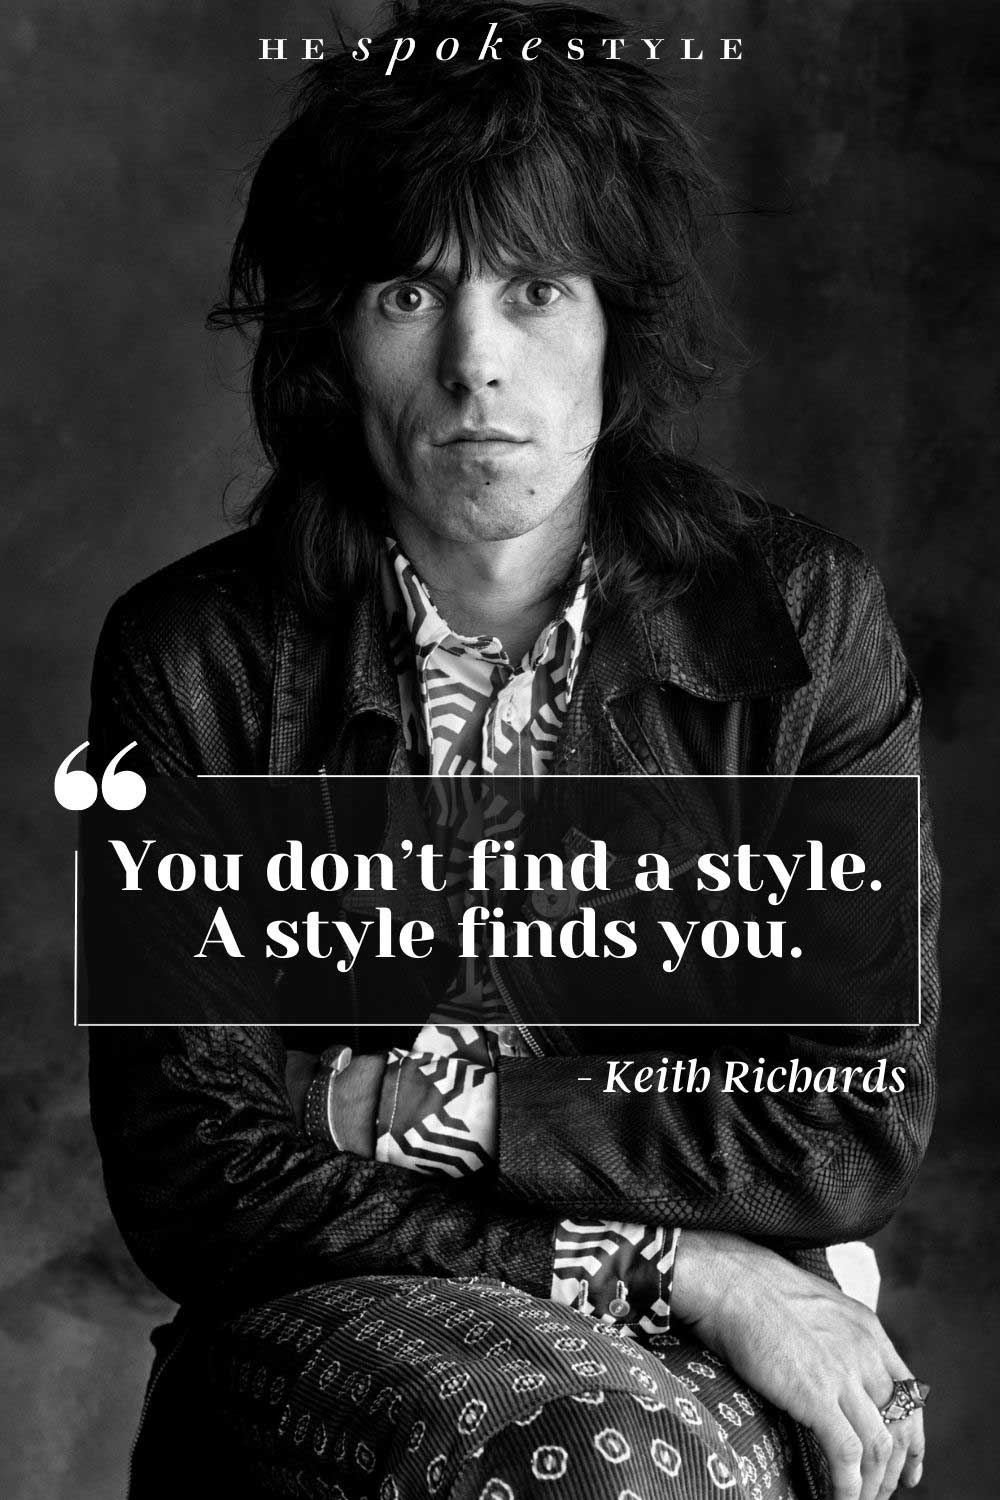 keith richards fashion quote